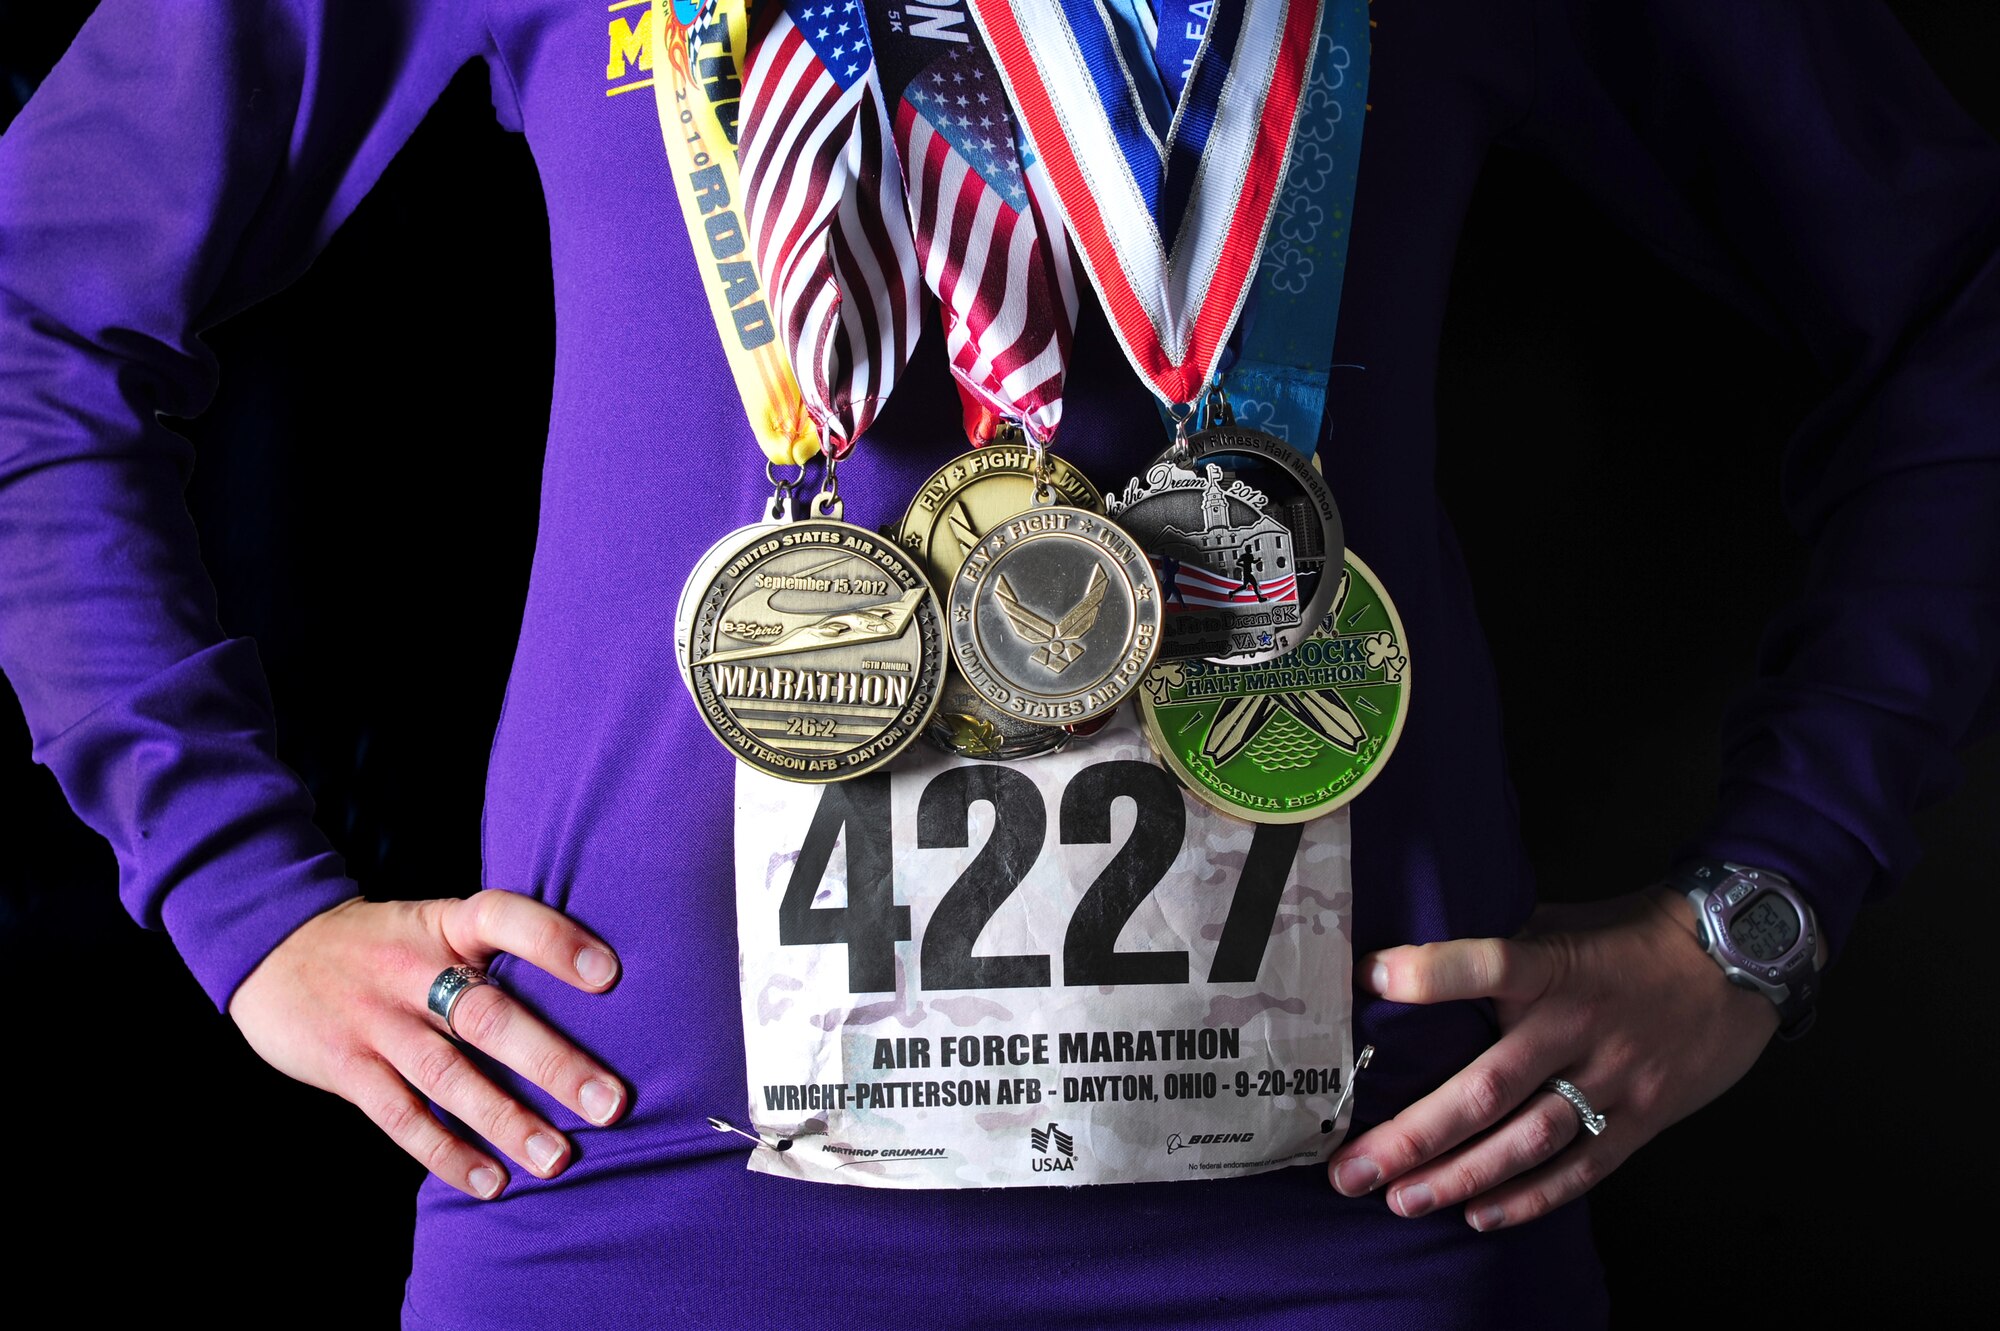 U.S. Air Force 2nd Lt. Abigail Webber, 633rd Inpatient Squadron labor and delivery nurse, wears her 2014 Air Force marathon bib number and medals from past half and full marathons, Nov. 19, 2014, at Langley Air Force Base, Va. Webber has run competitively since she joined her seventh grade cross country team at age 13. (U.S. Air Force photo by Staff Sgt. Natasha Stannard/Released)  